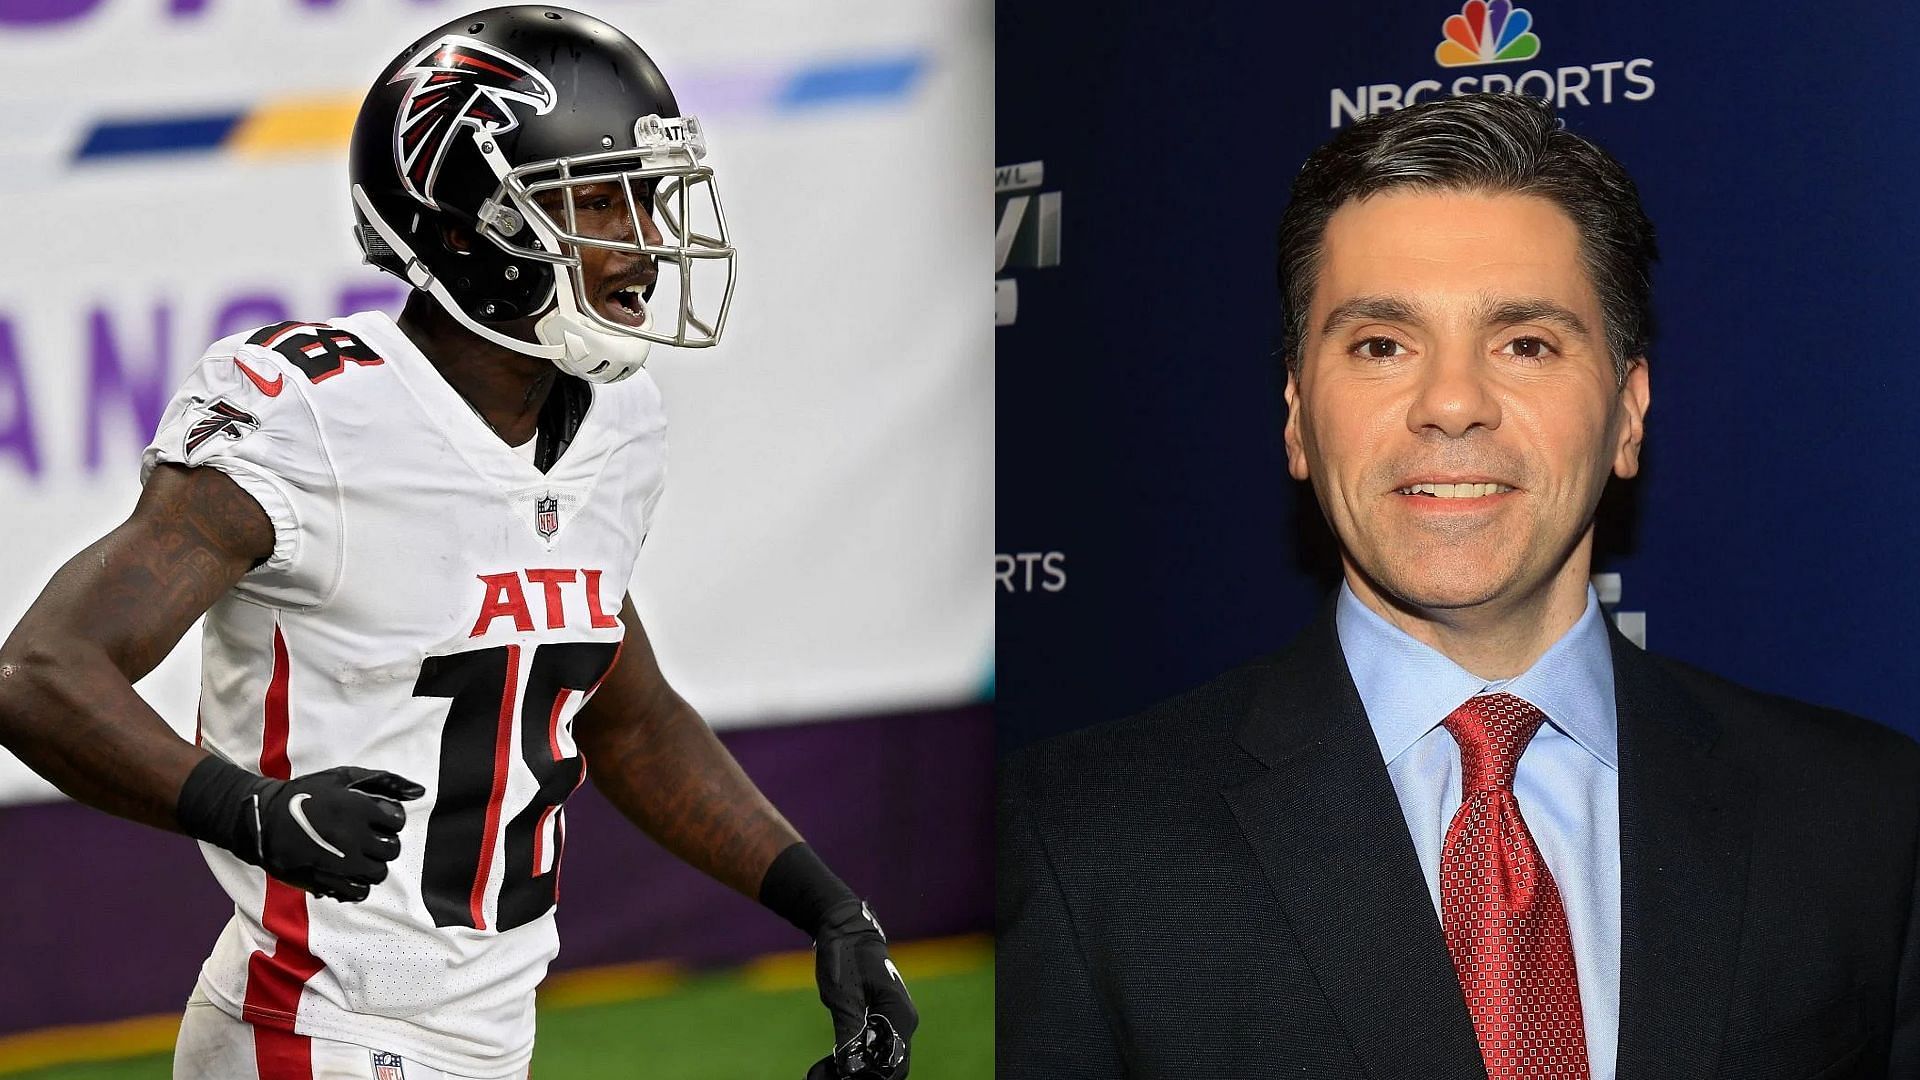 Mike Florio has stated that betting on the NFL by players throws the integrity of the league into jeopardy. 